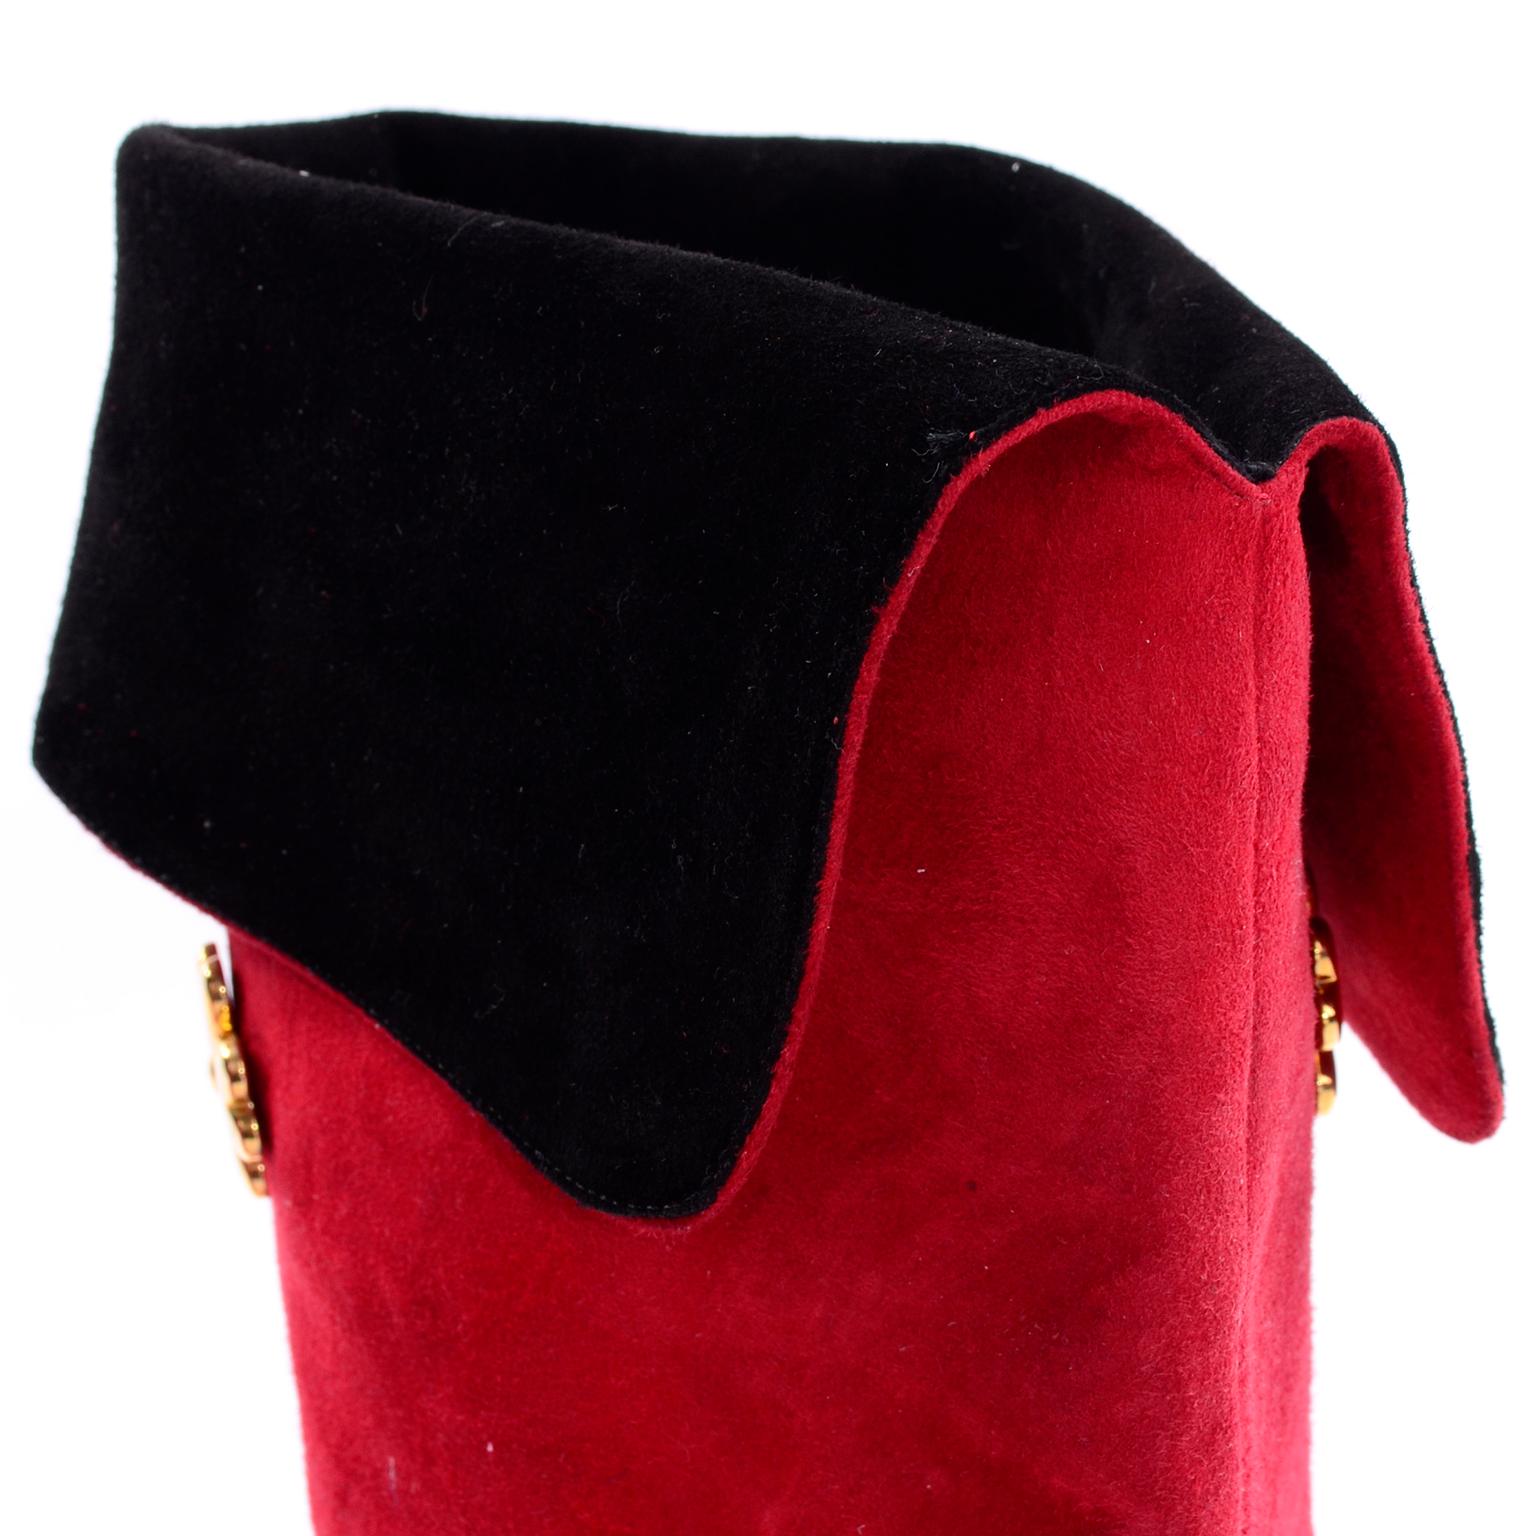 Vintage 1980s Escada Red Suede Boots With Gold Metal Clovers Size 37 5